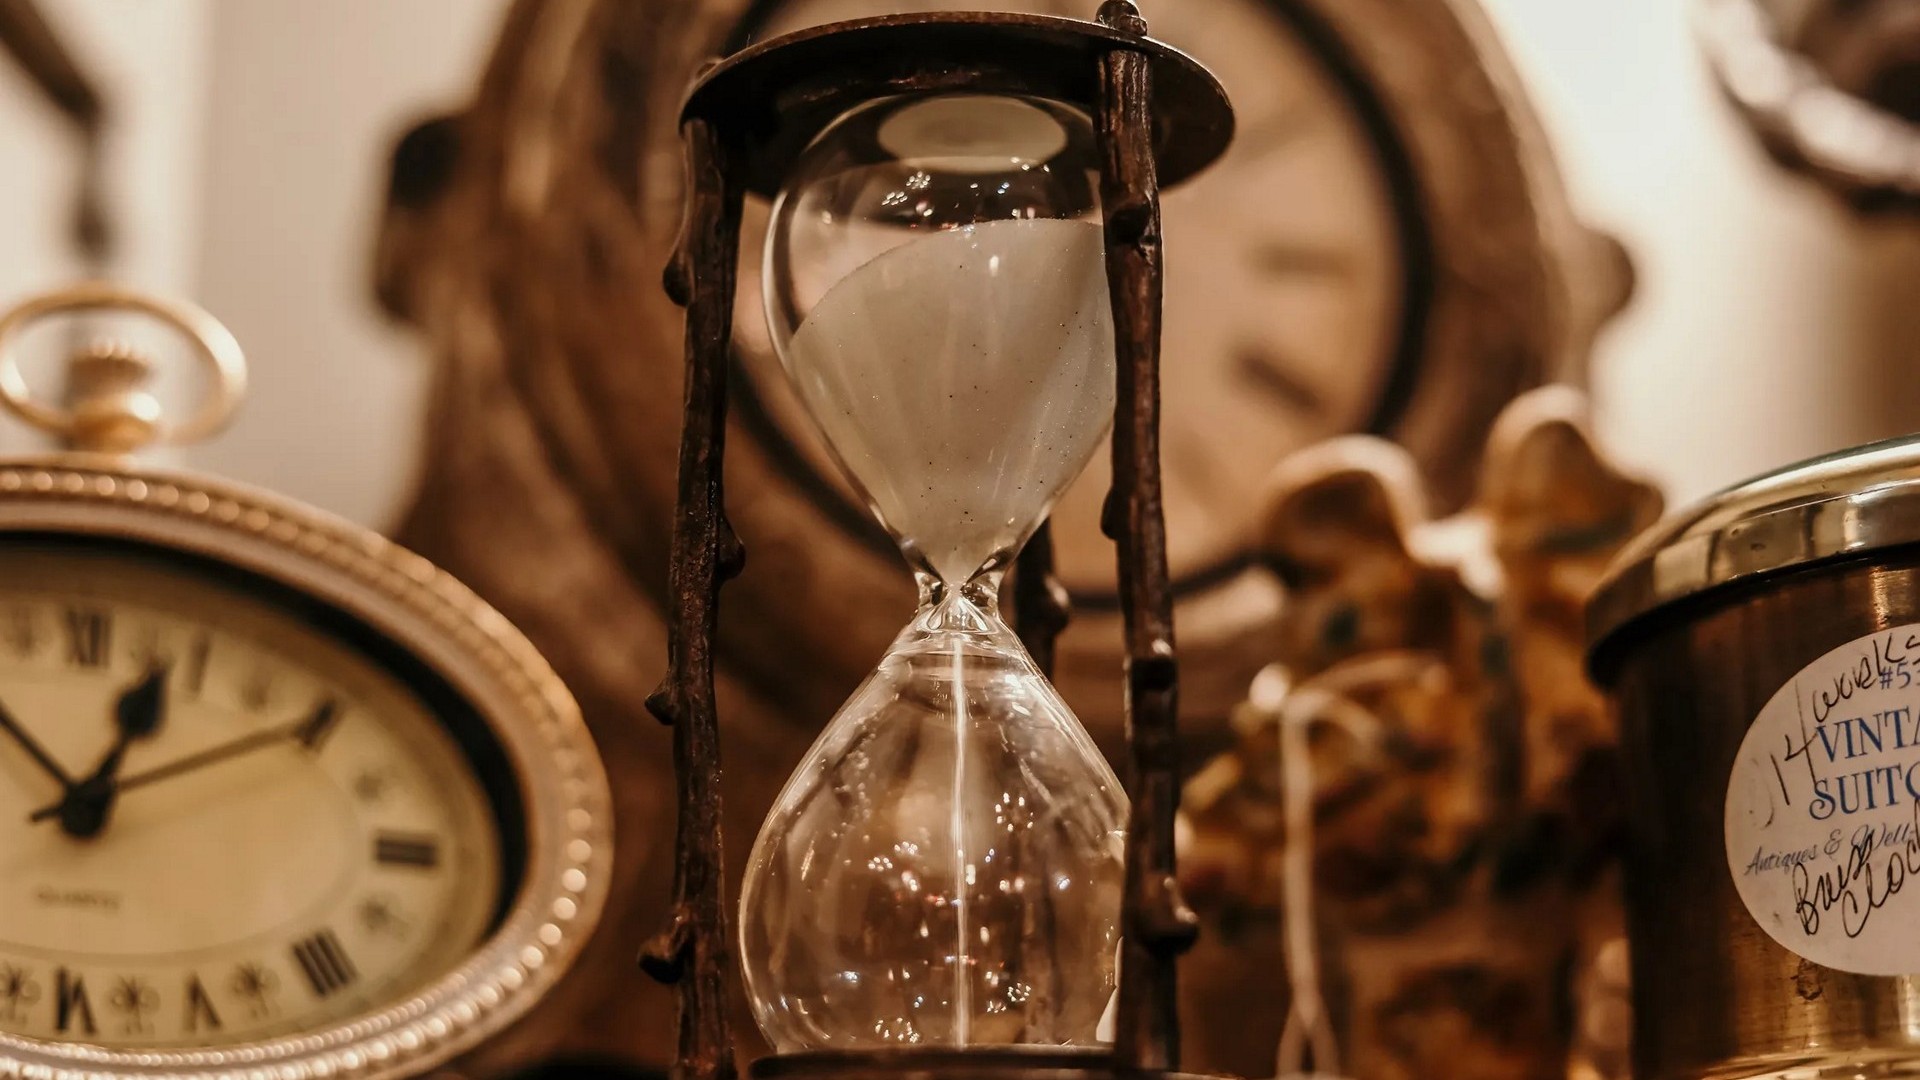 Sand flowing through an hourglass